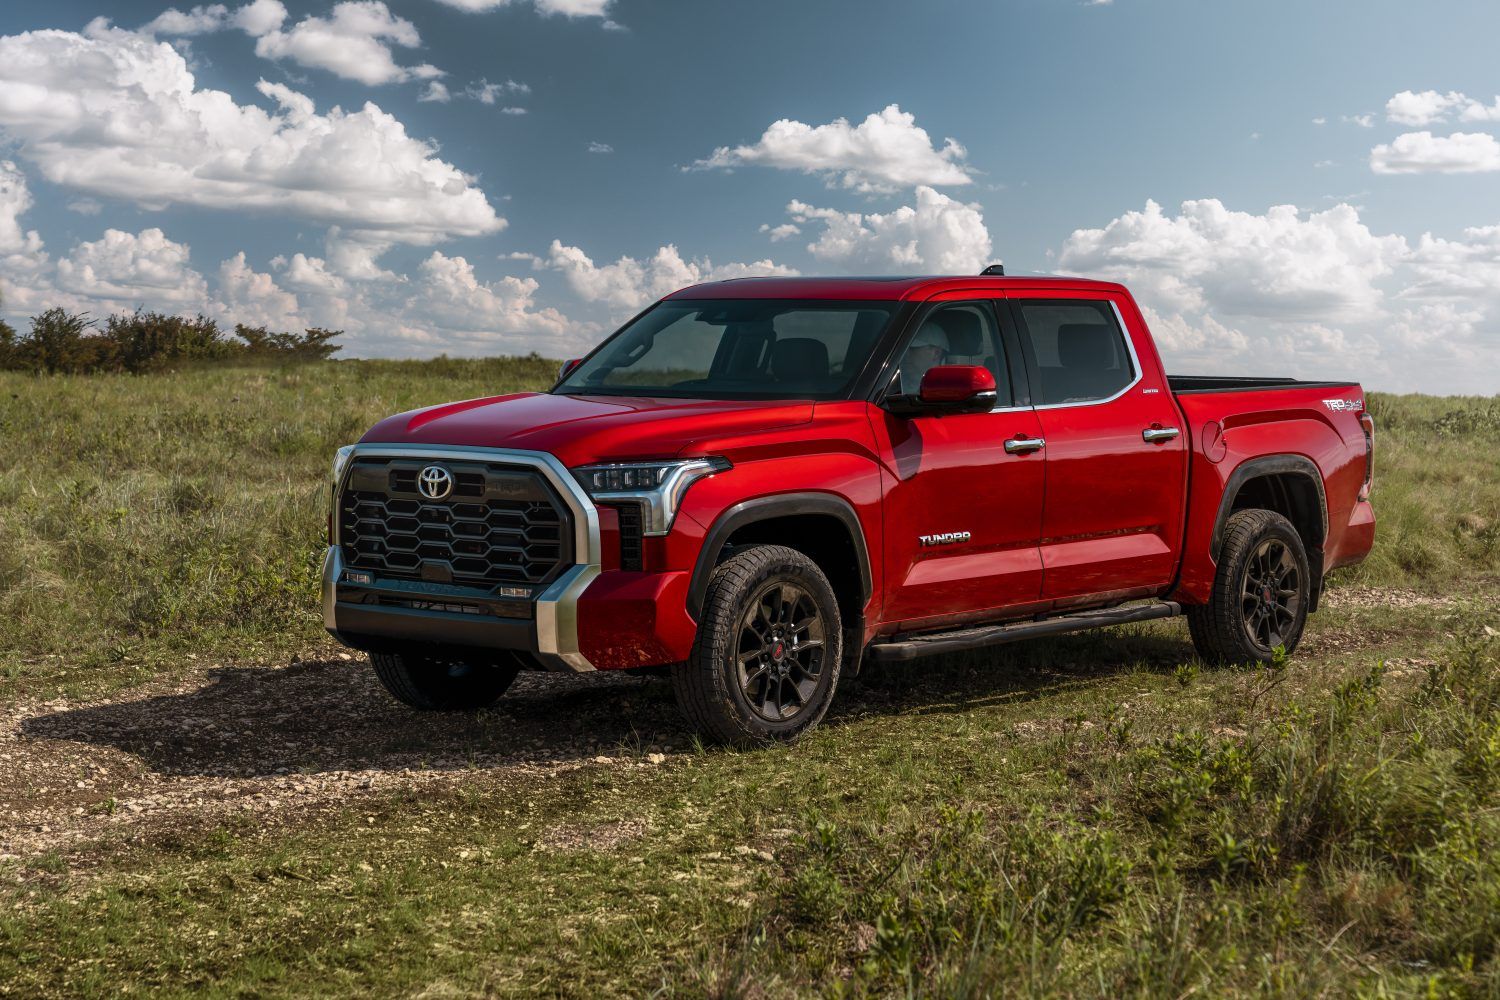 2022 Toyota tundra iforce max hybrid release new TRD Pro for sale best option reliable grass wallpaper